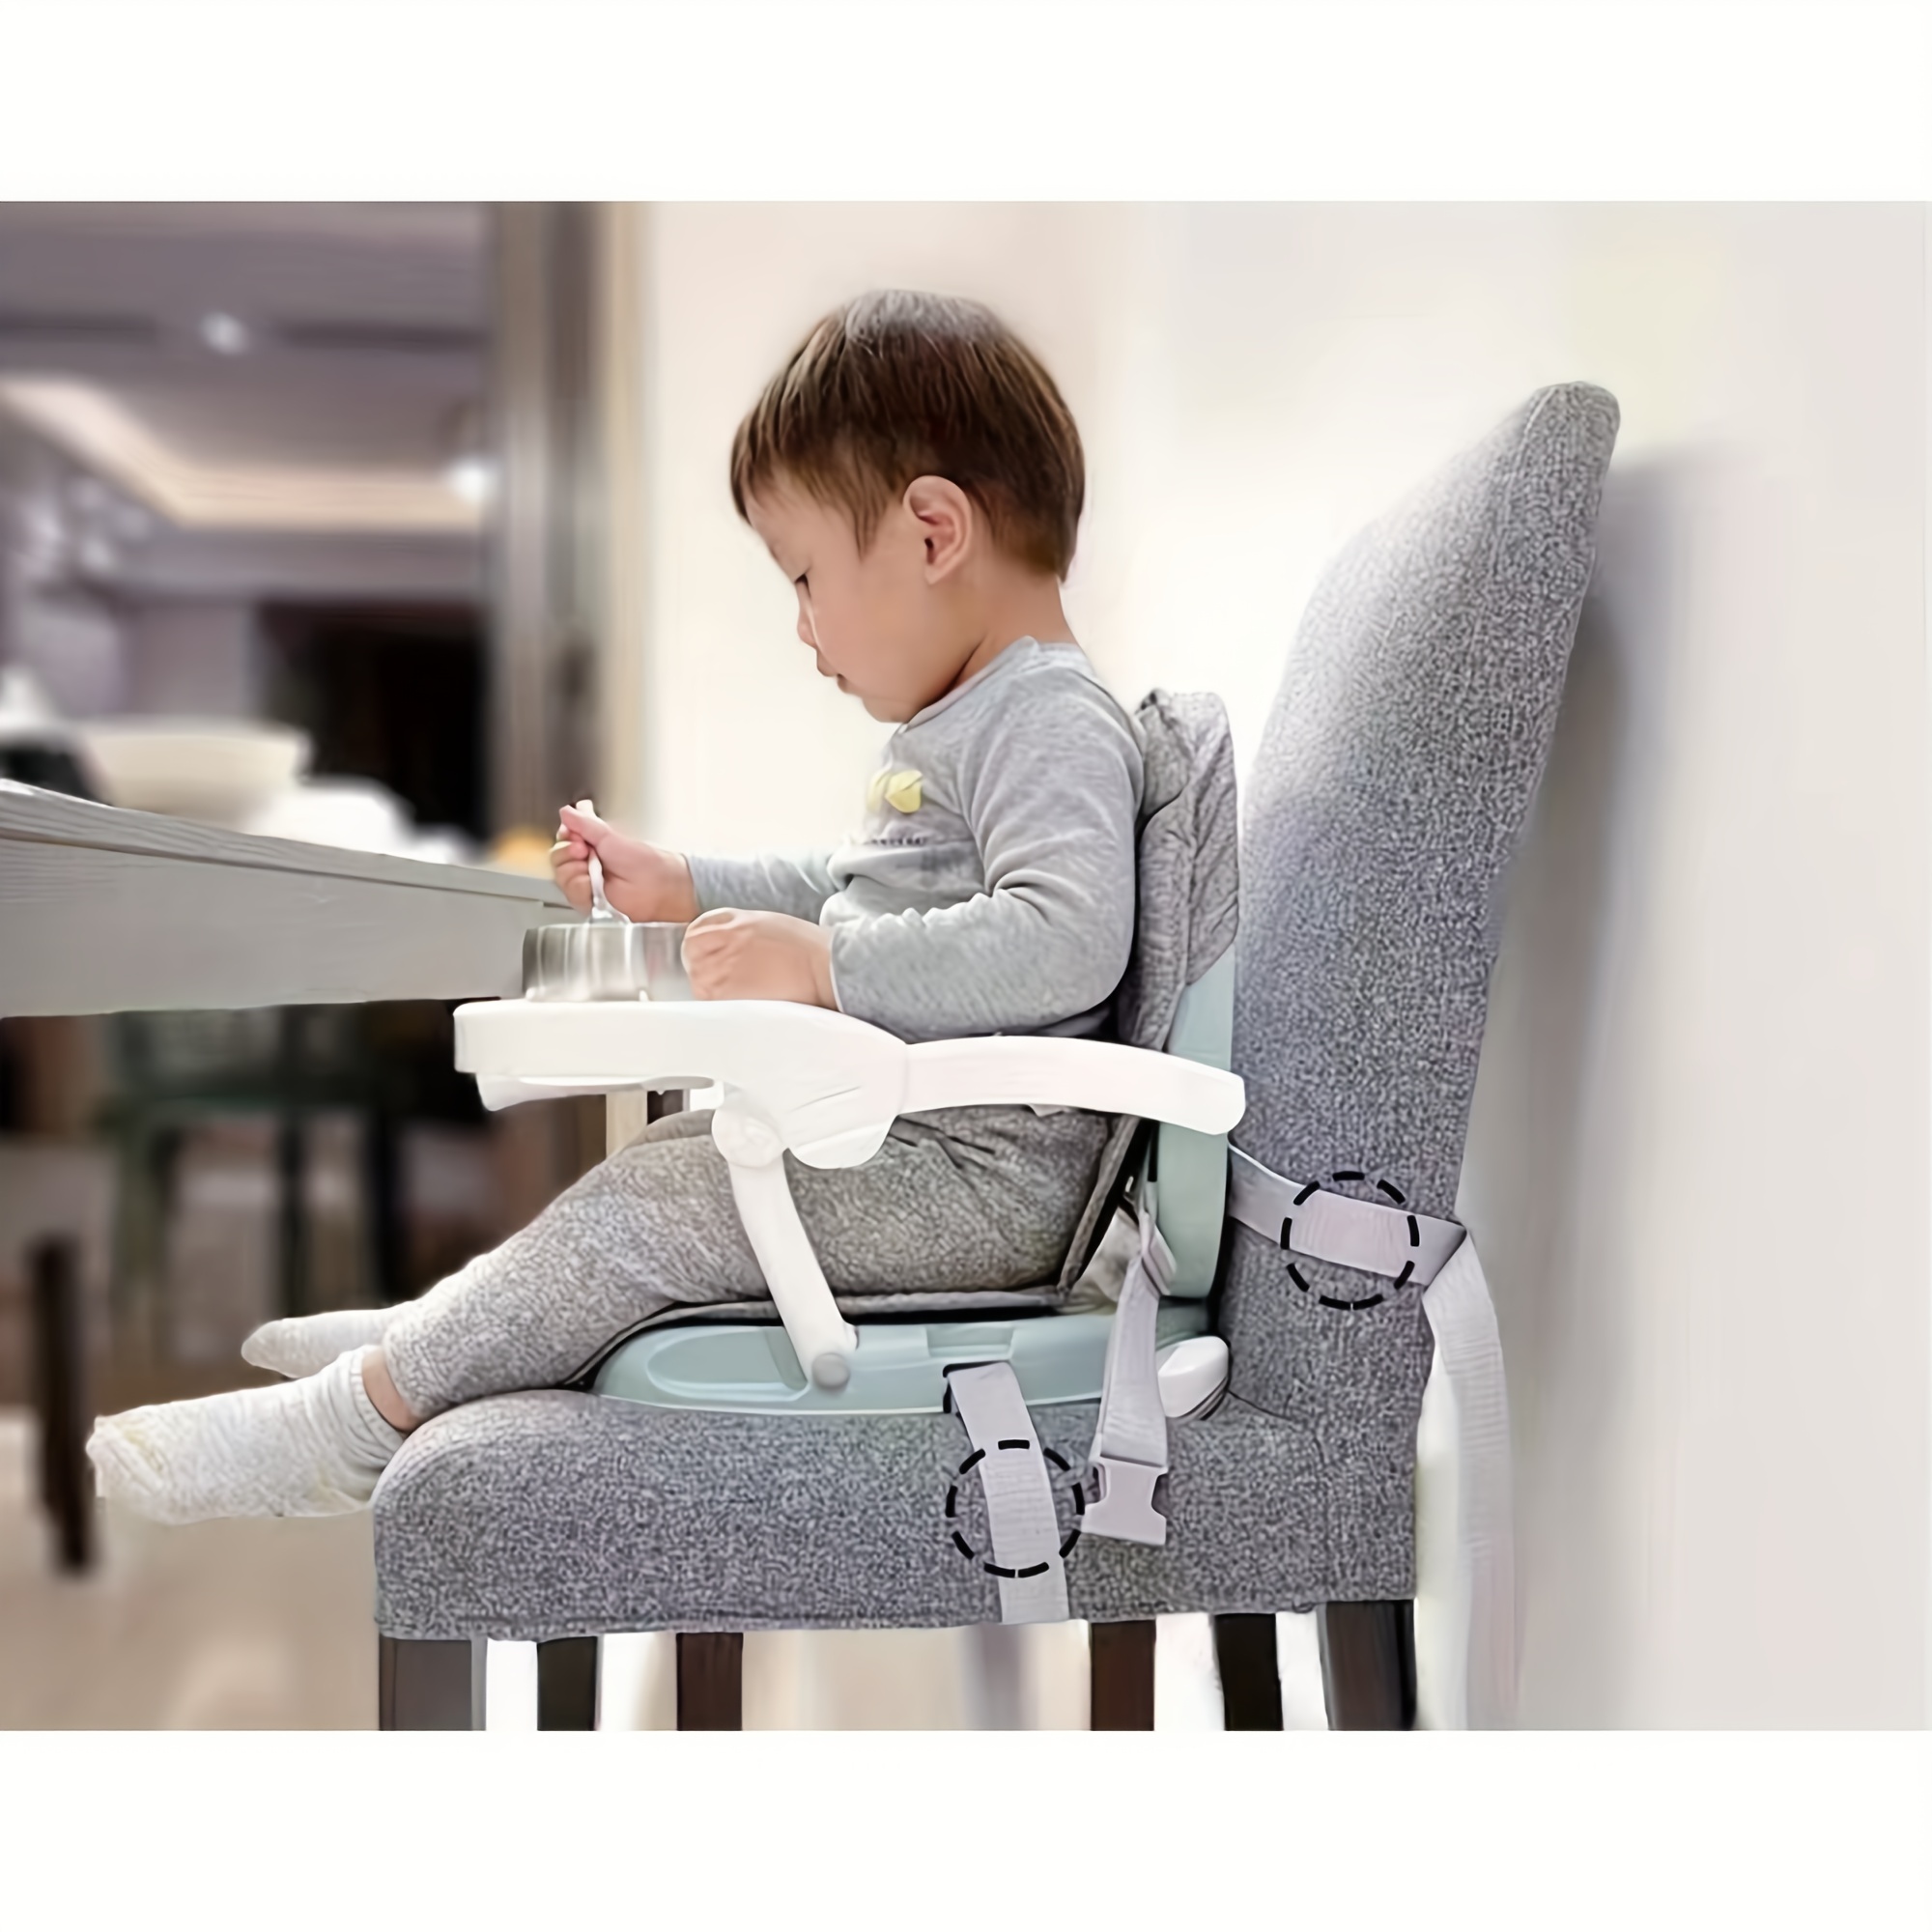 Toddler Booster Seat for Dining Table, Booster Seat for Baby